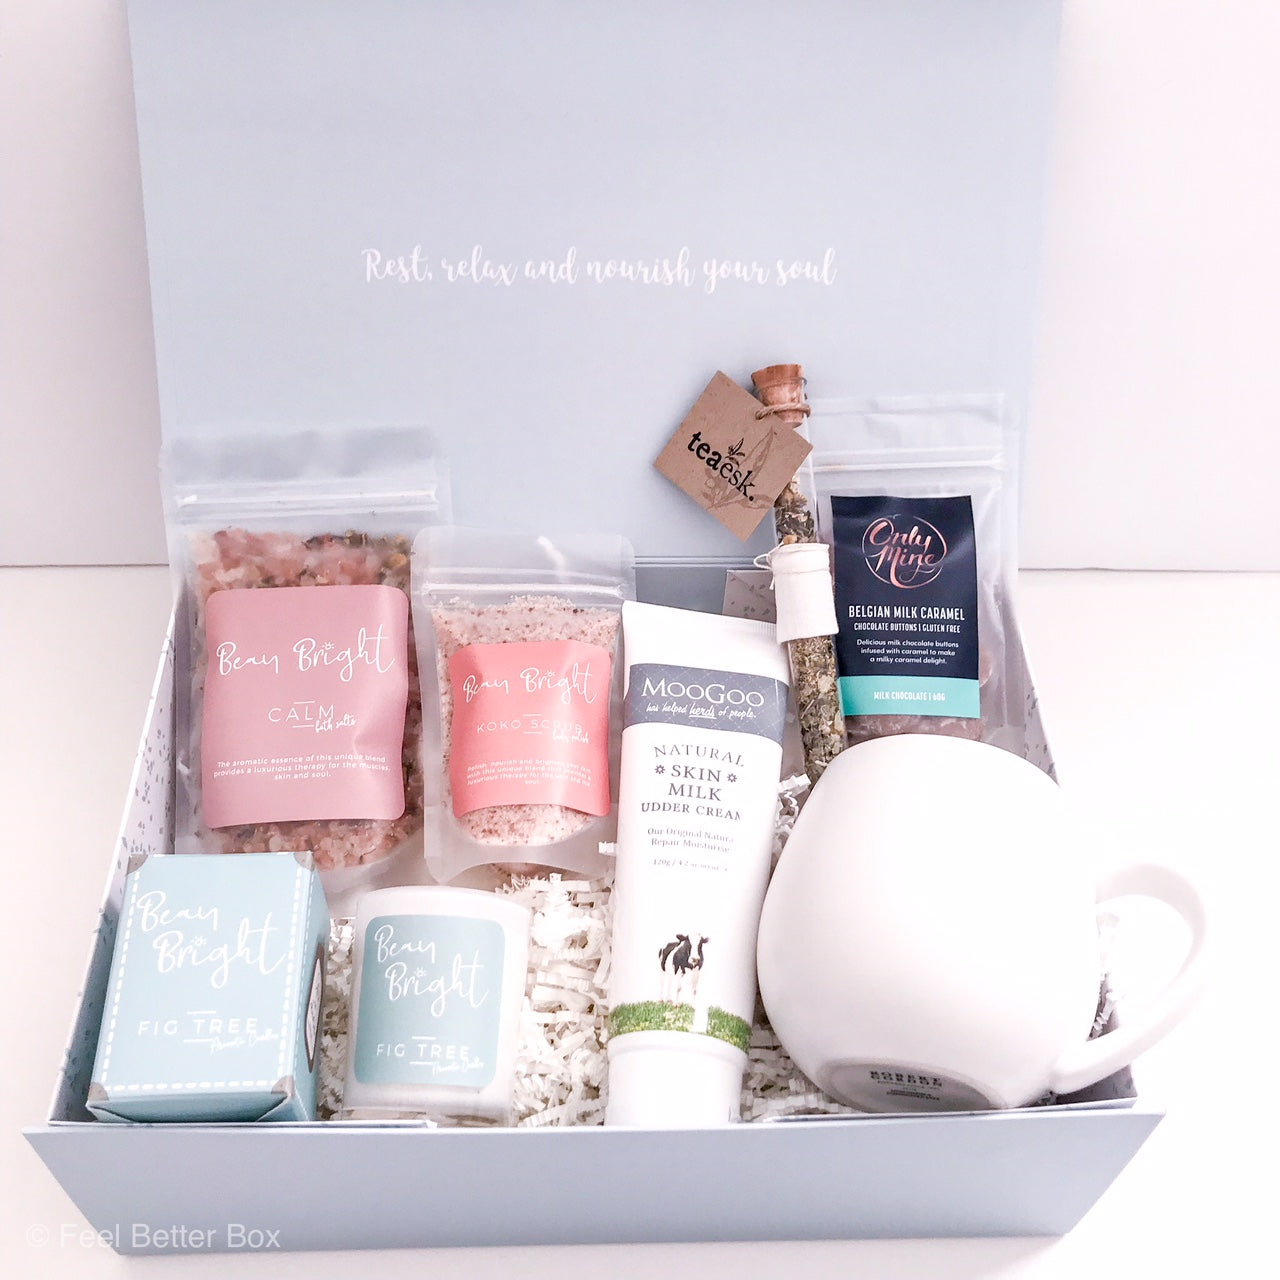 Afternoon Pick me up Hamper to cheer up a loved one - Feel Better Box